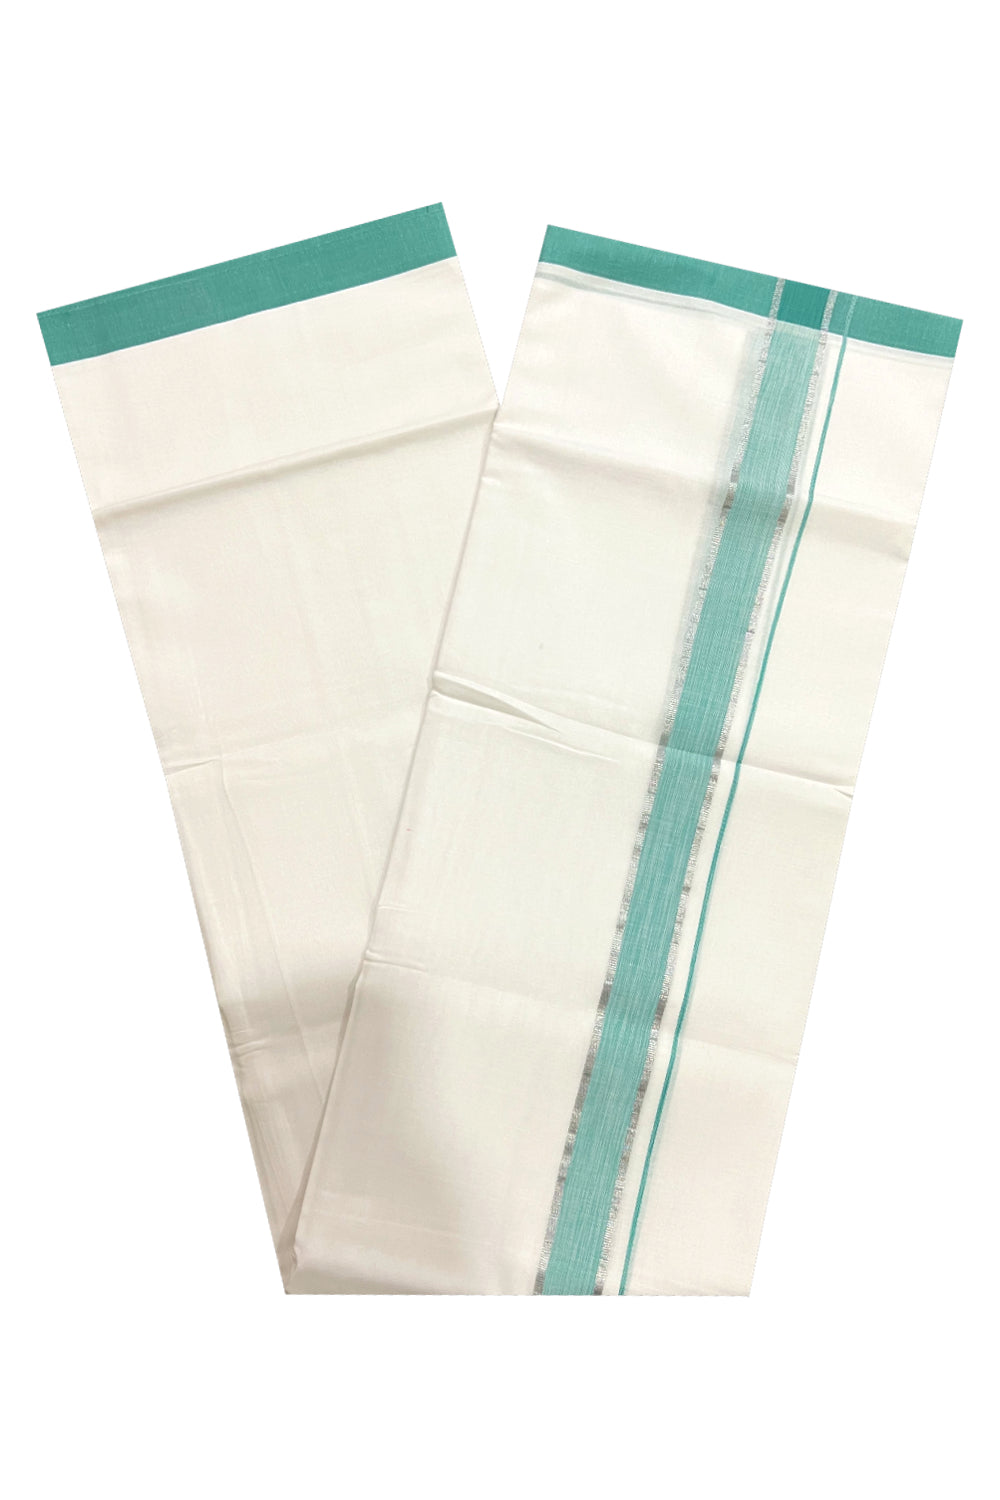 Pure White Cotton Double Mundu with Light Green and Silver Kasavu Border (South Indian Dhoti)